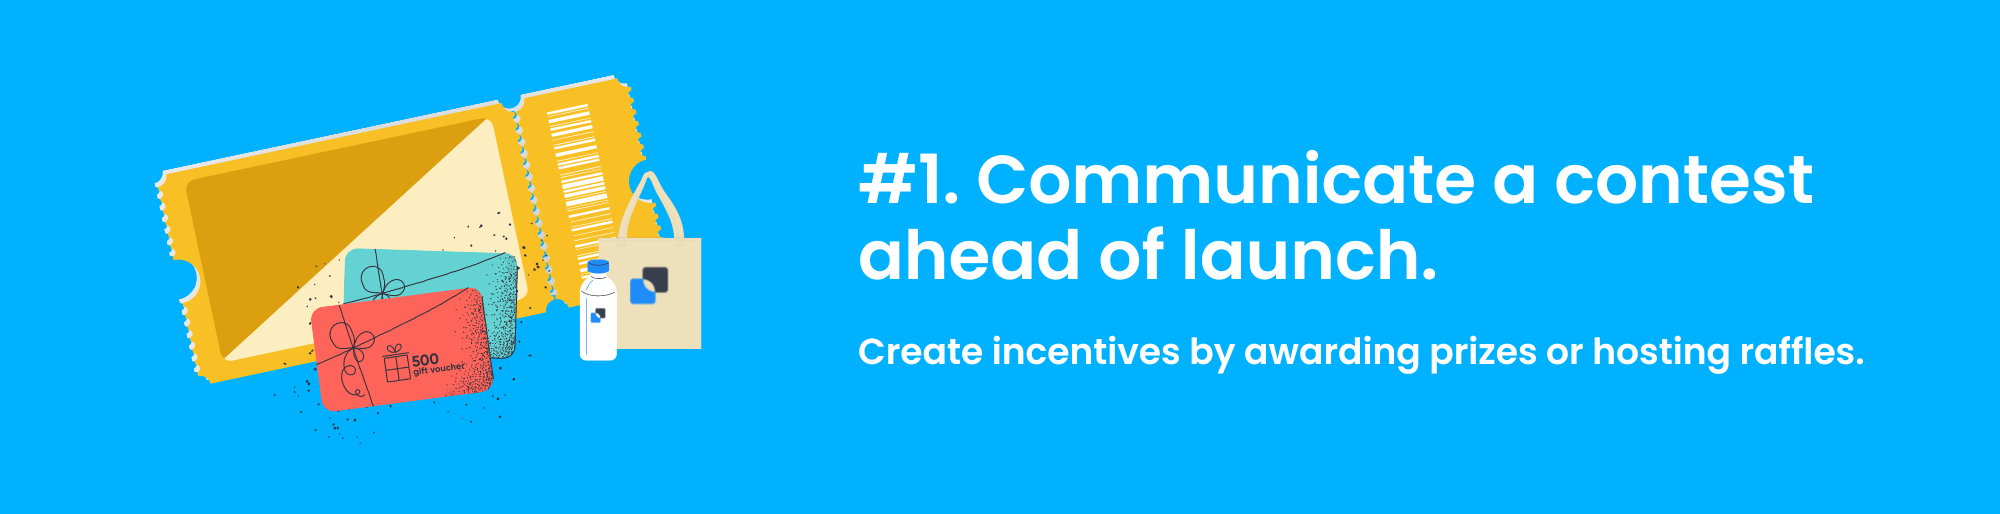 Incentive strategy 1 - communicate a contest ahead of launch